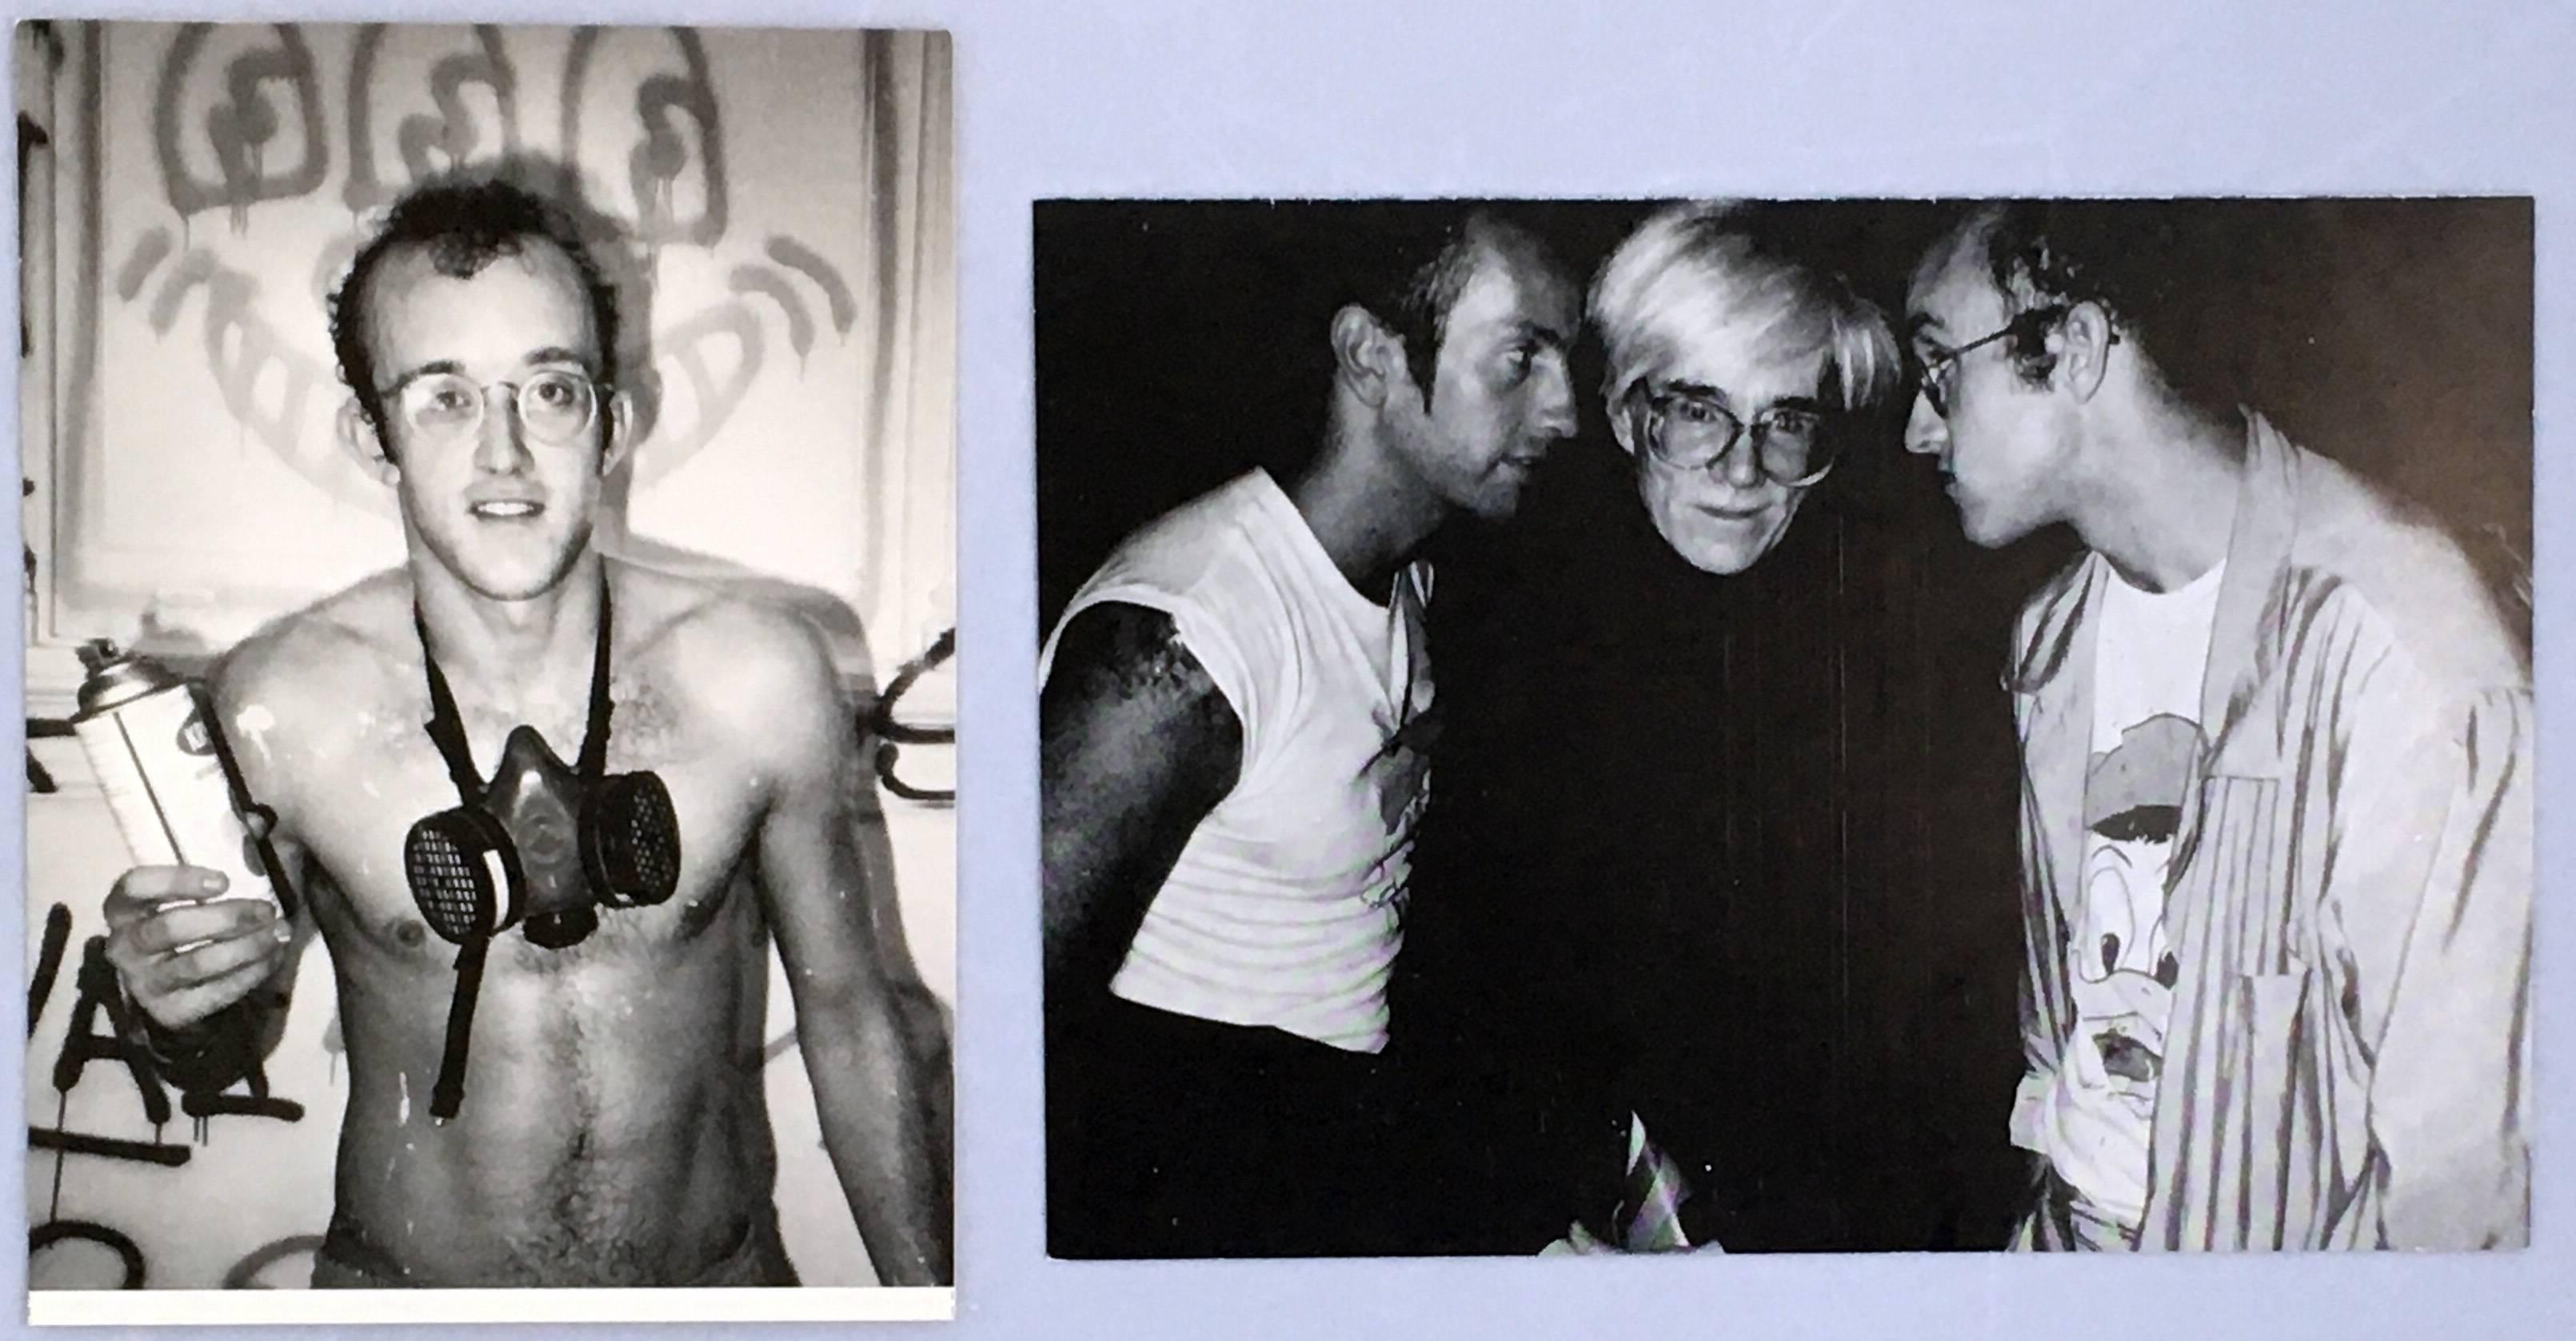 Keith Haring, Andy Warhol & Kenny Scharf:
Rare vintage announcement card for the 1987 exhibit: Patrick McMullen at The Palladium, New York City, 1987. Photo uniquely features Keith Haring, Kenny Scharf, and Andy Warhol together partying at one of